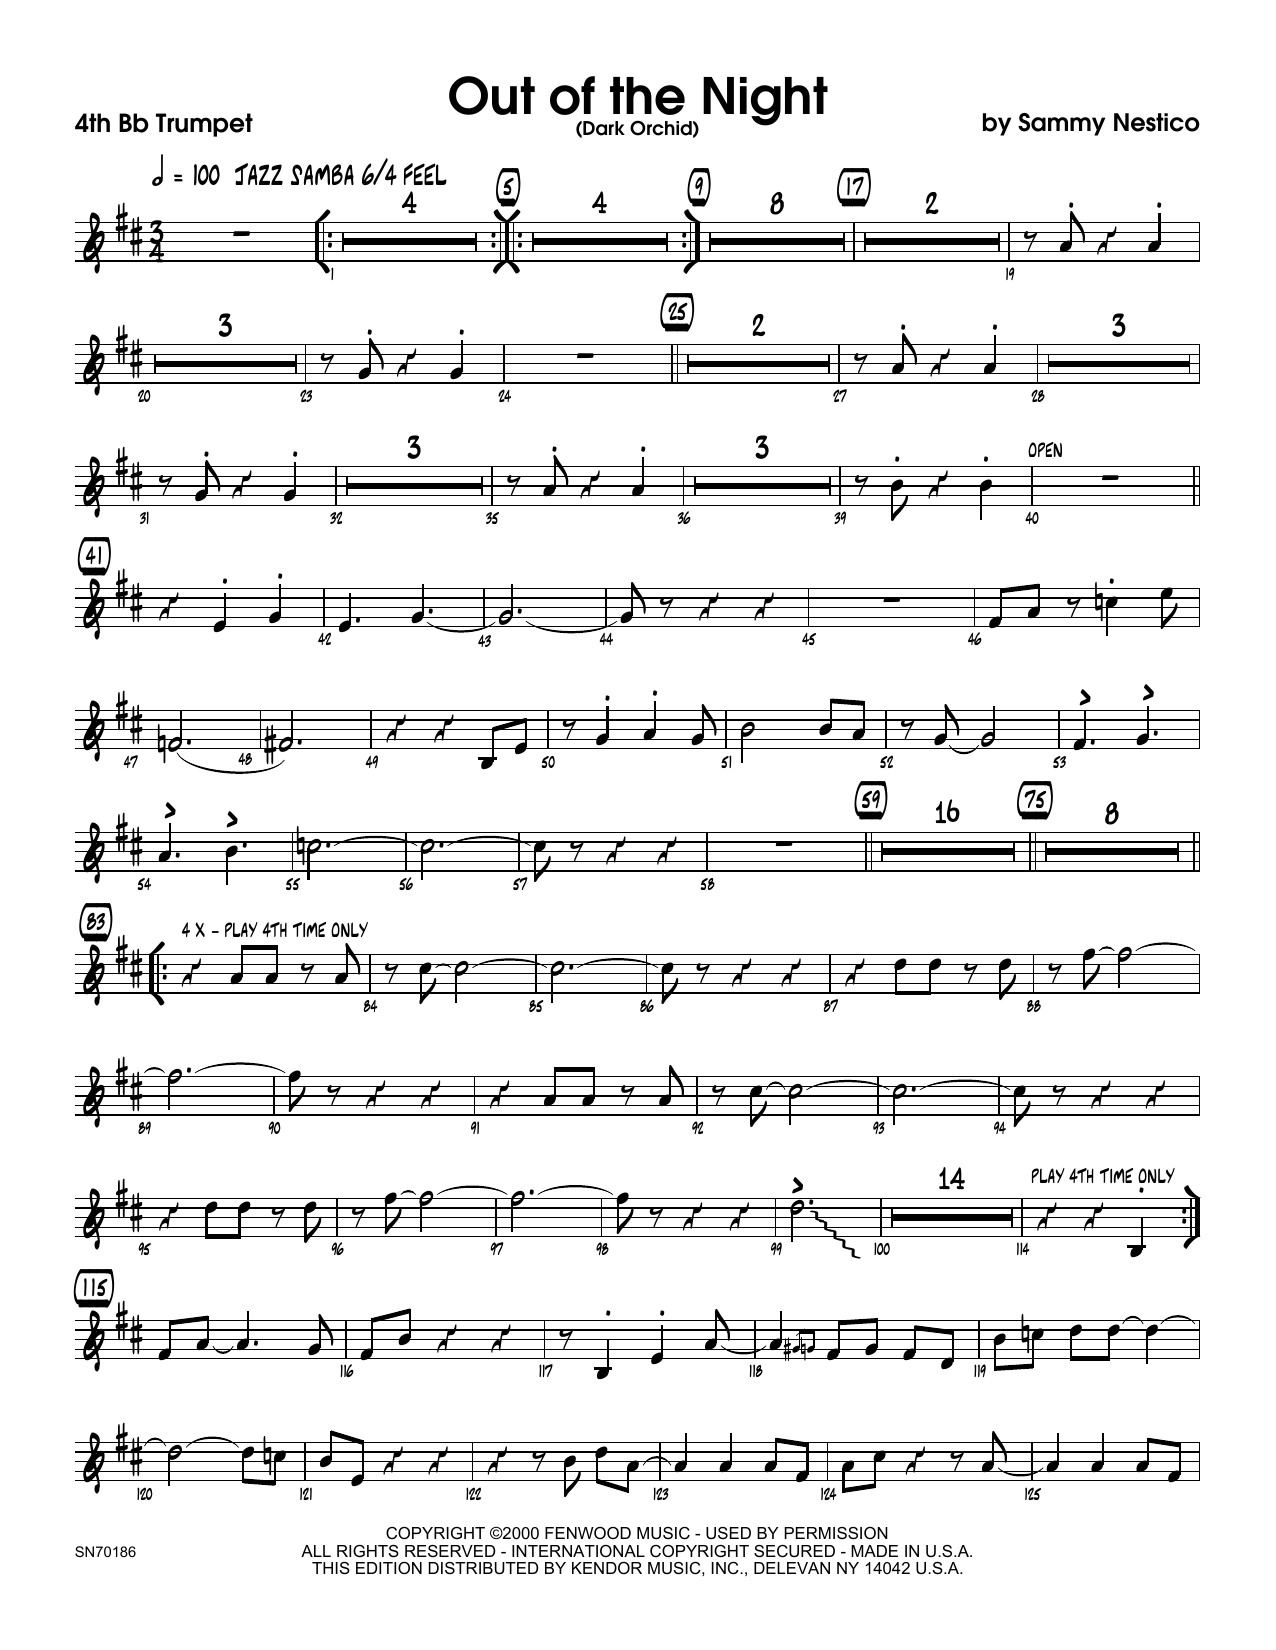 Download Sammy Nestico Out of the Night - 4th Bb Trumpet Sheet Music